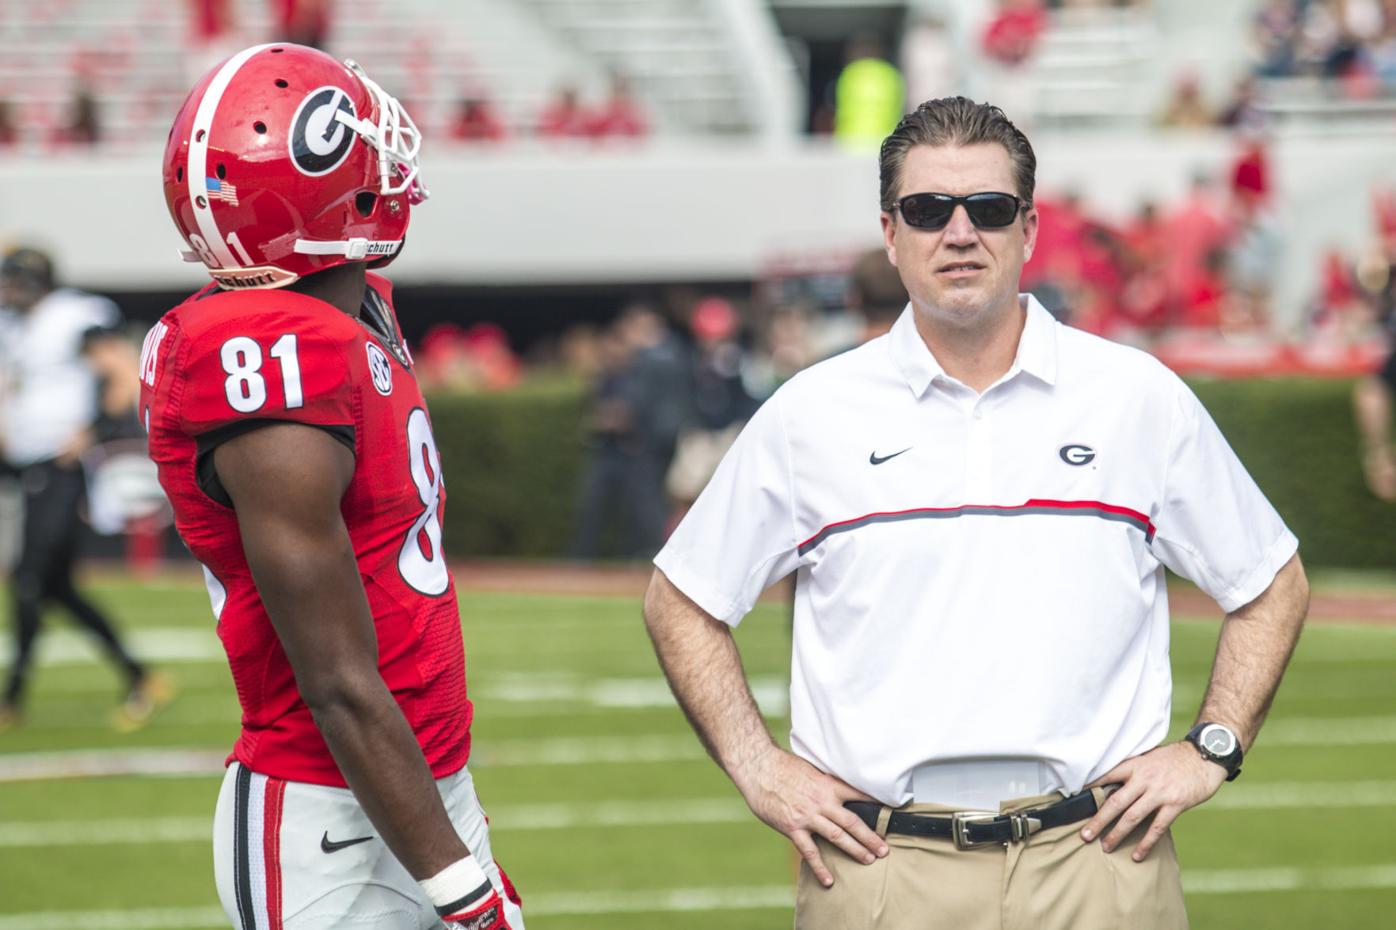 New offensive coordinator James Coley will not overhaul Georgia's playbook,  offensive base to remain the same | Georgia Sports | redandblack.com